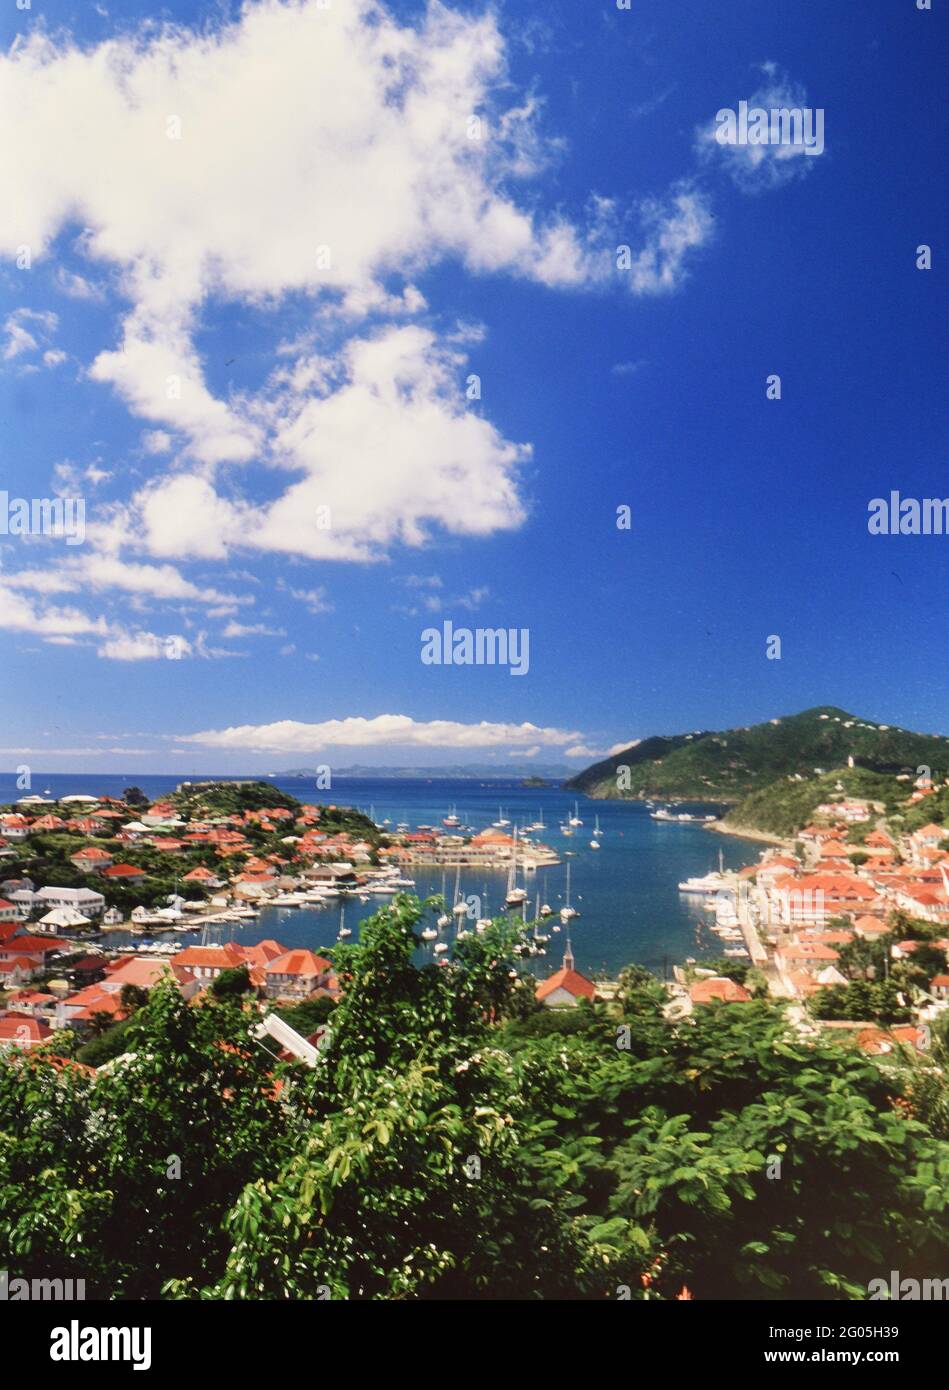 High Quality Stock Videos of gustavia